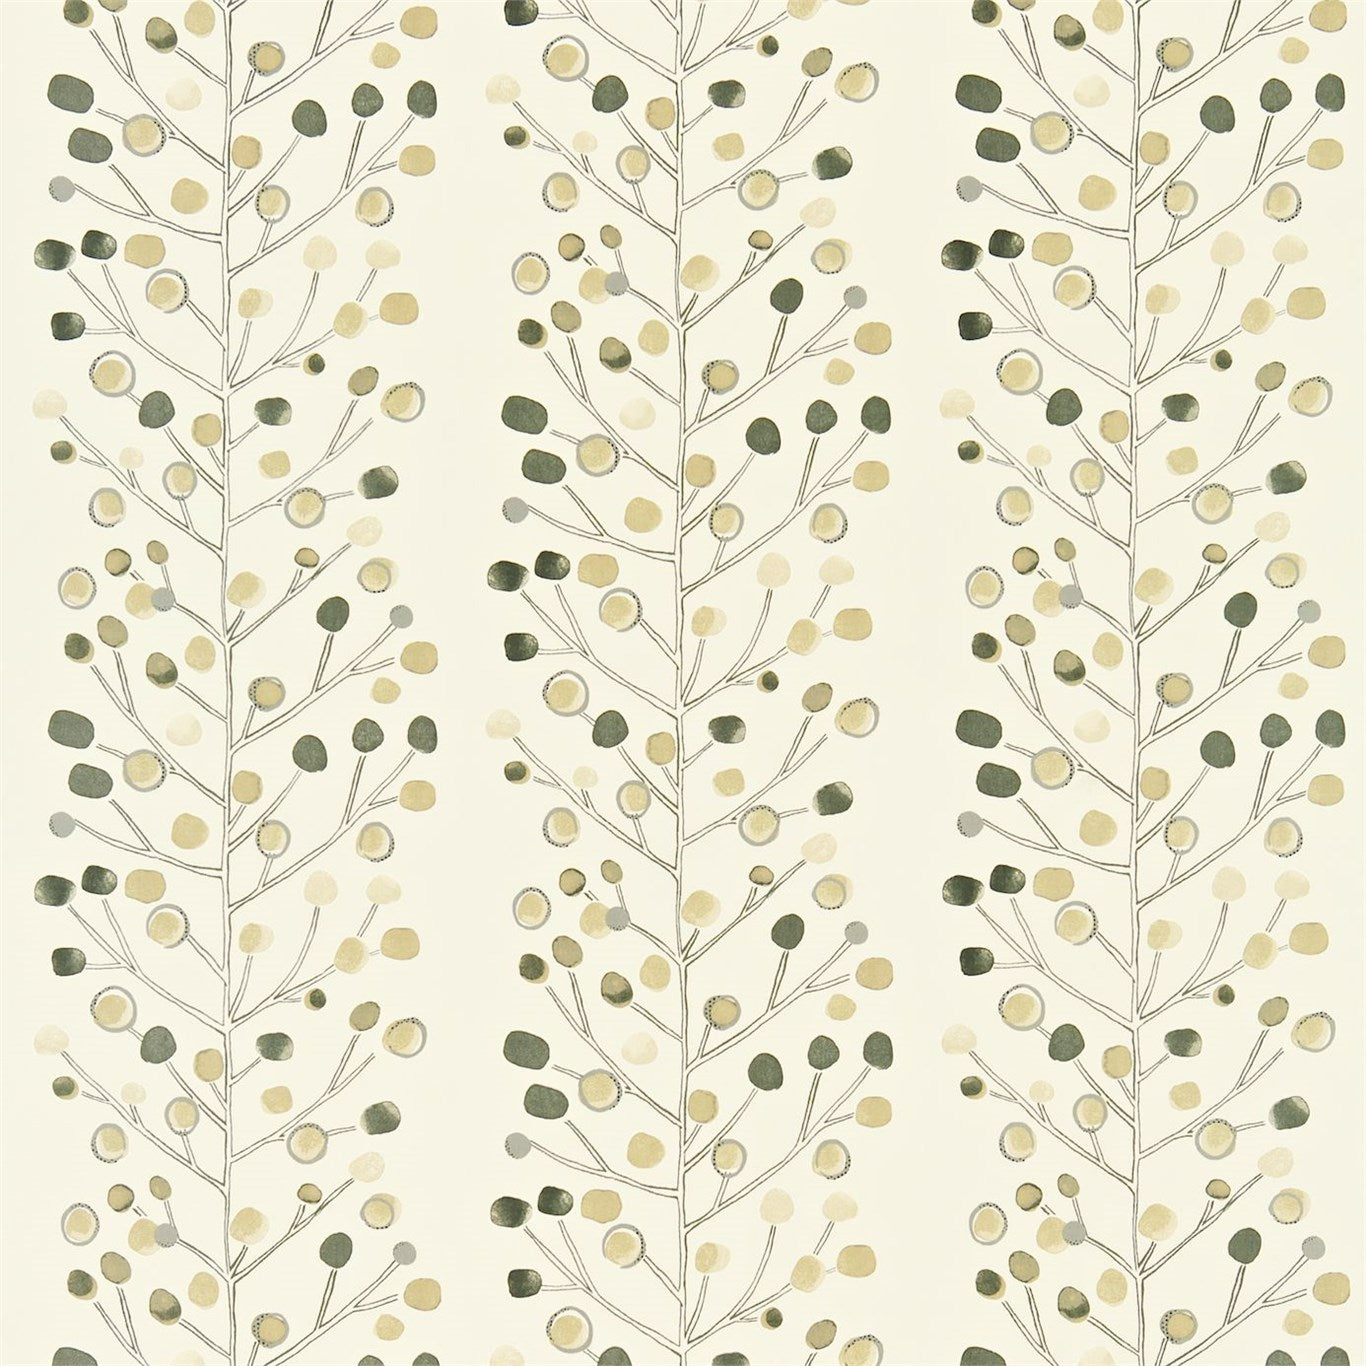 Berry Tree Fabric by Scion - NMEL120050 - Cream Storm And Hessian